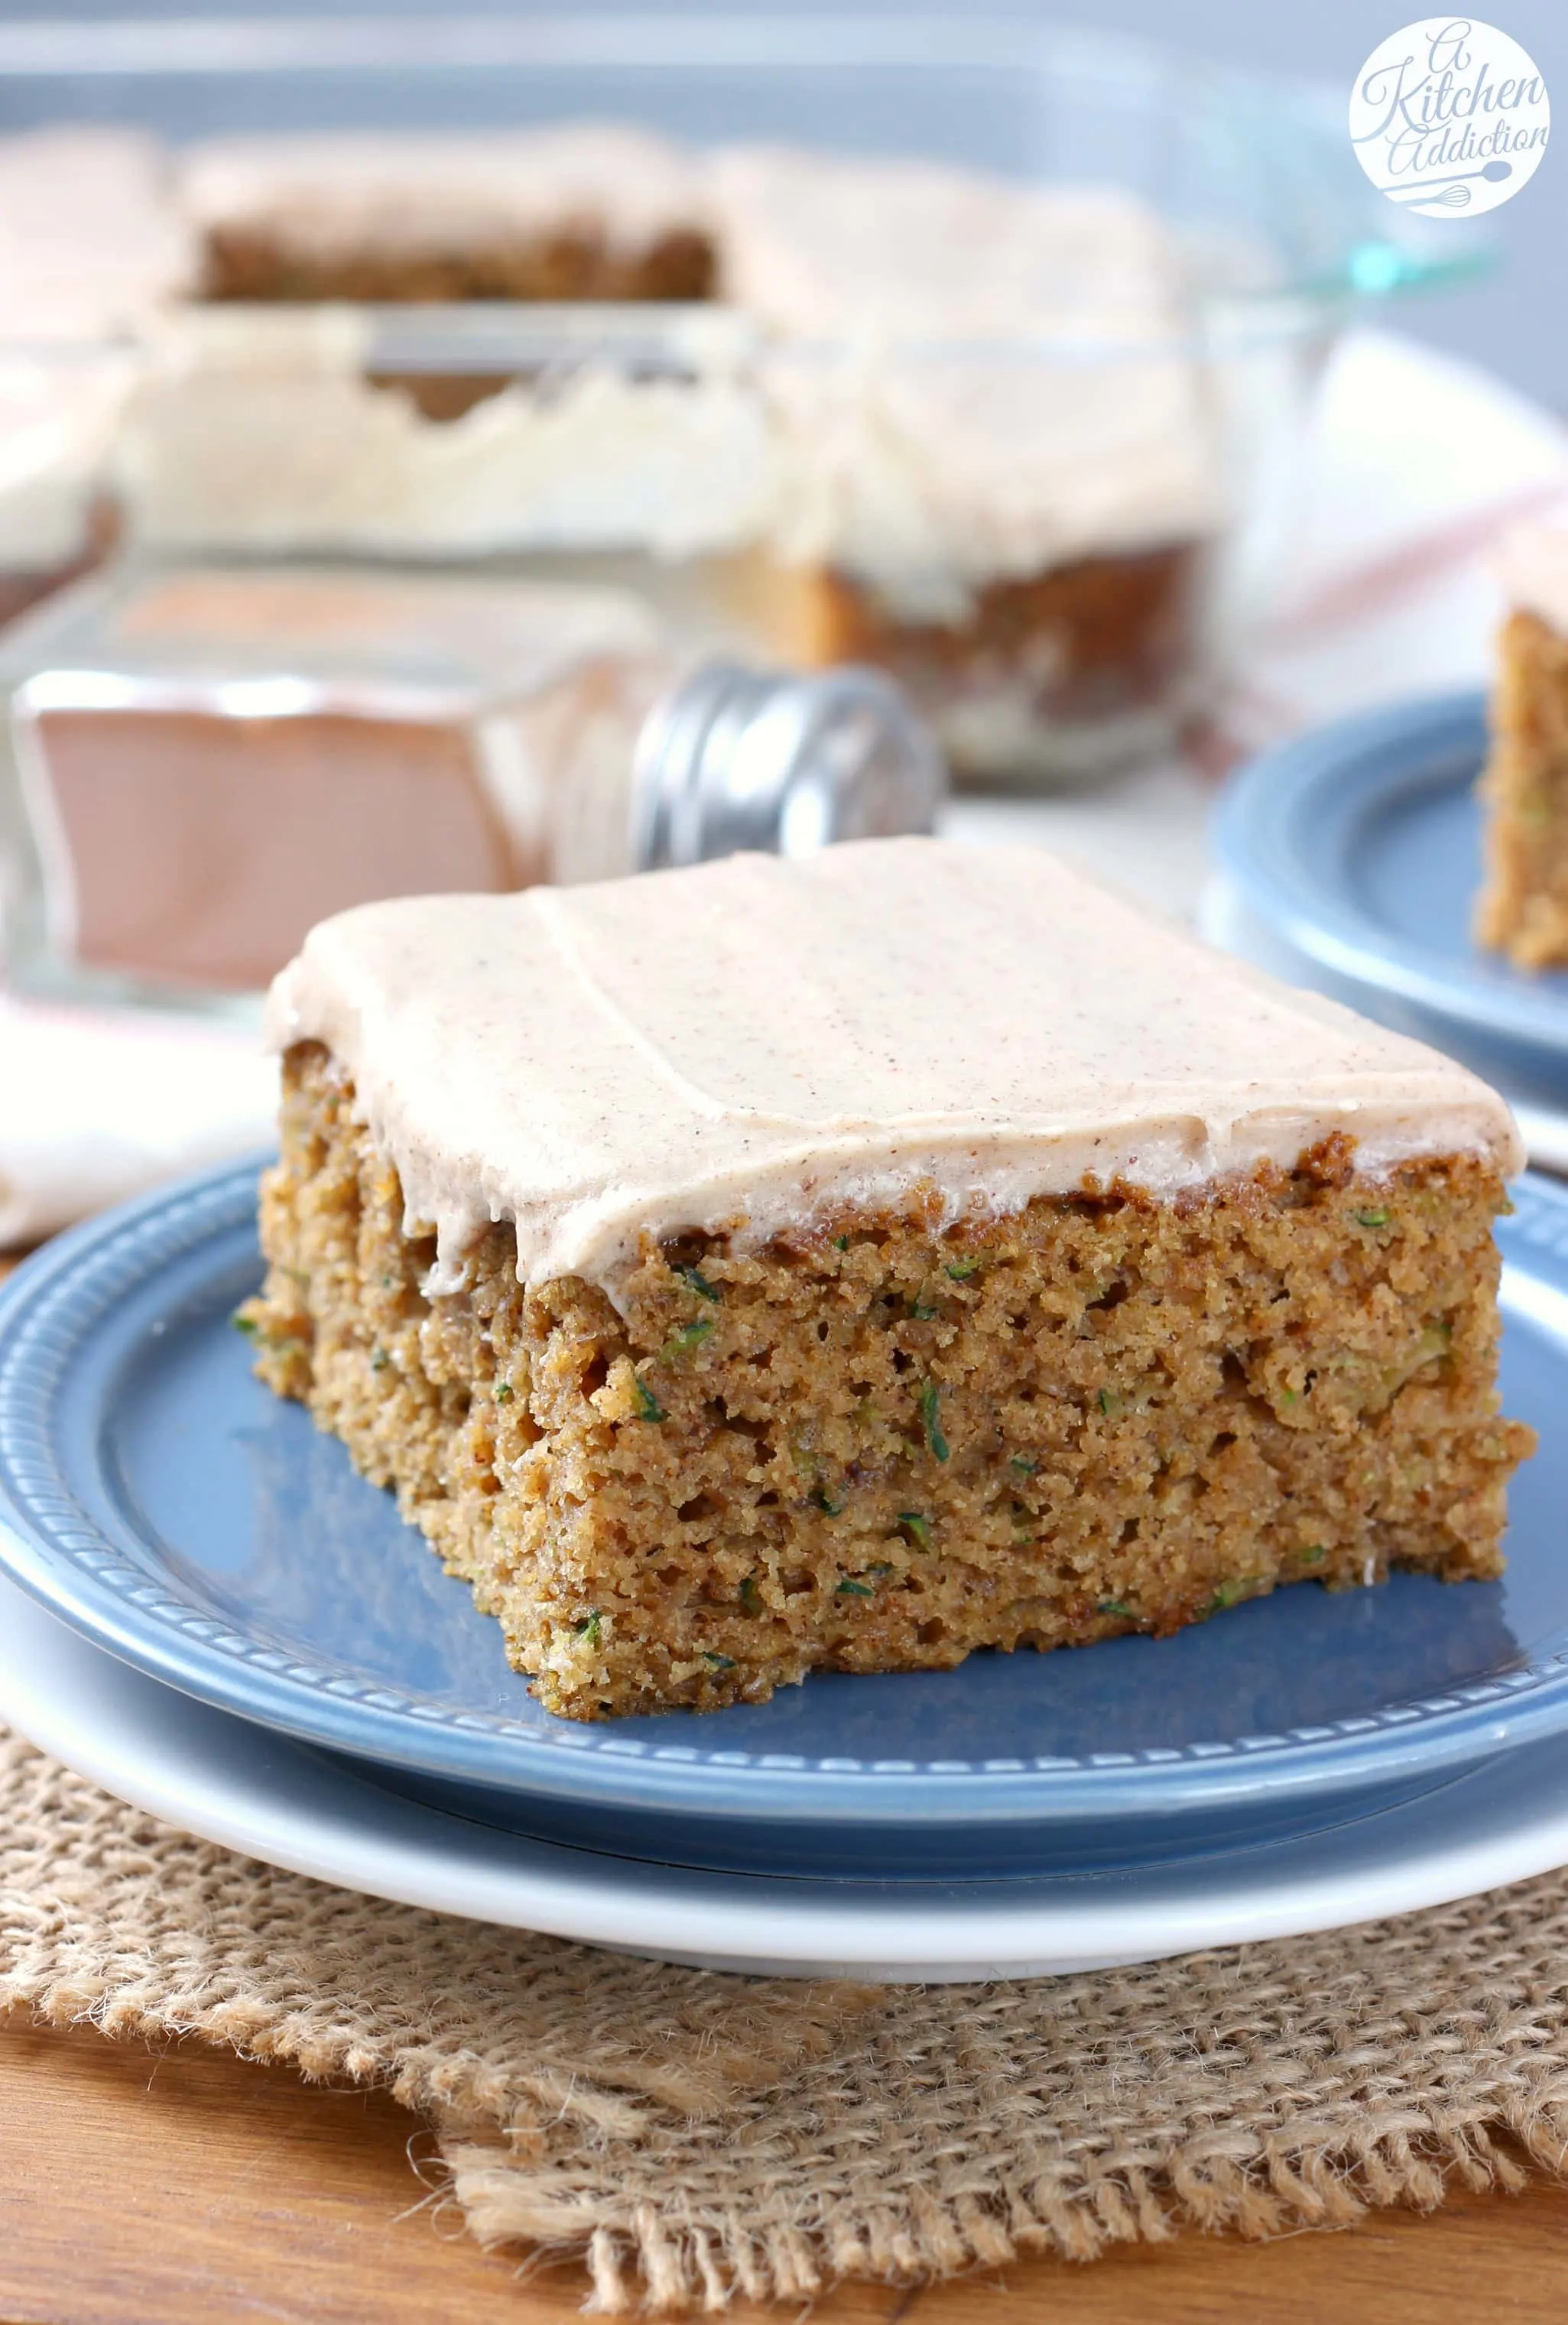 Zucchini Cake with Spiced Cream Cheese Frosting Recipe from A Kitchen Addiction